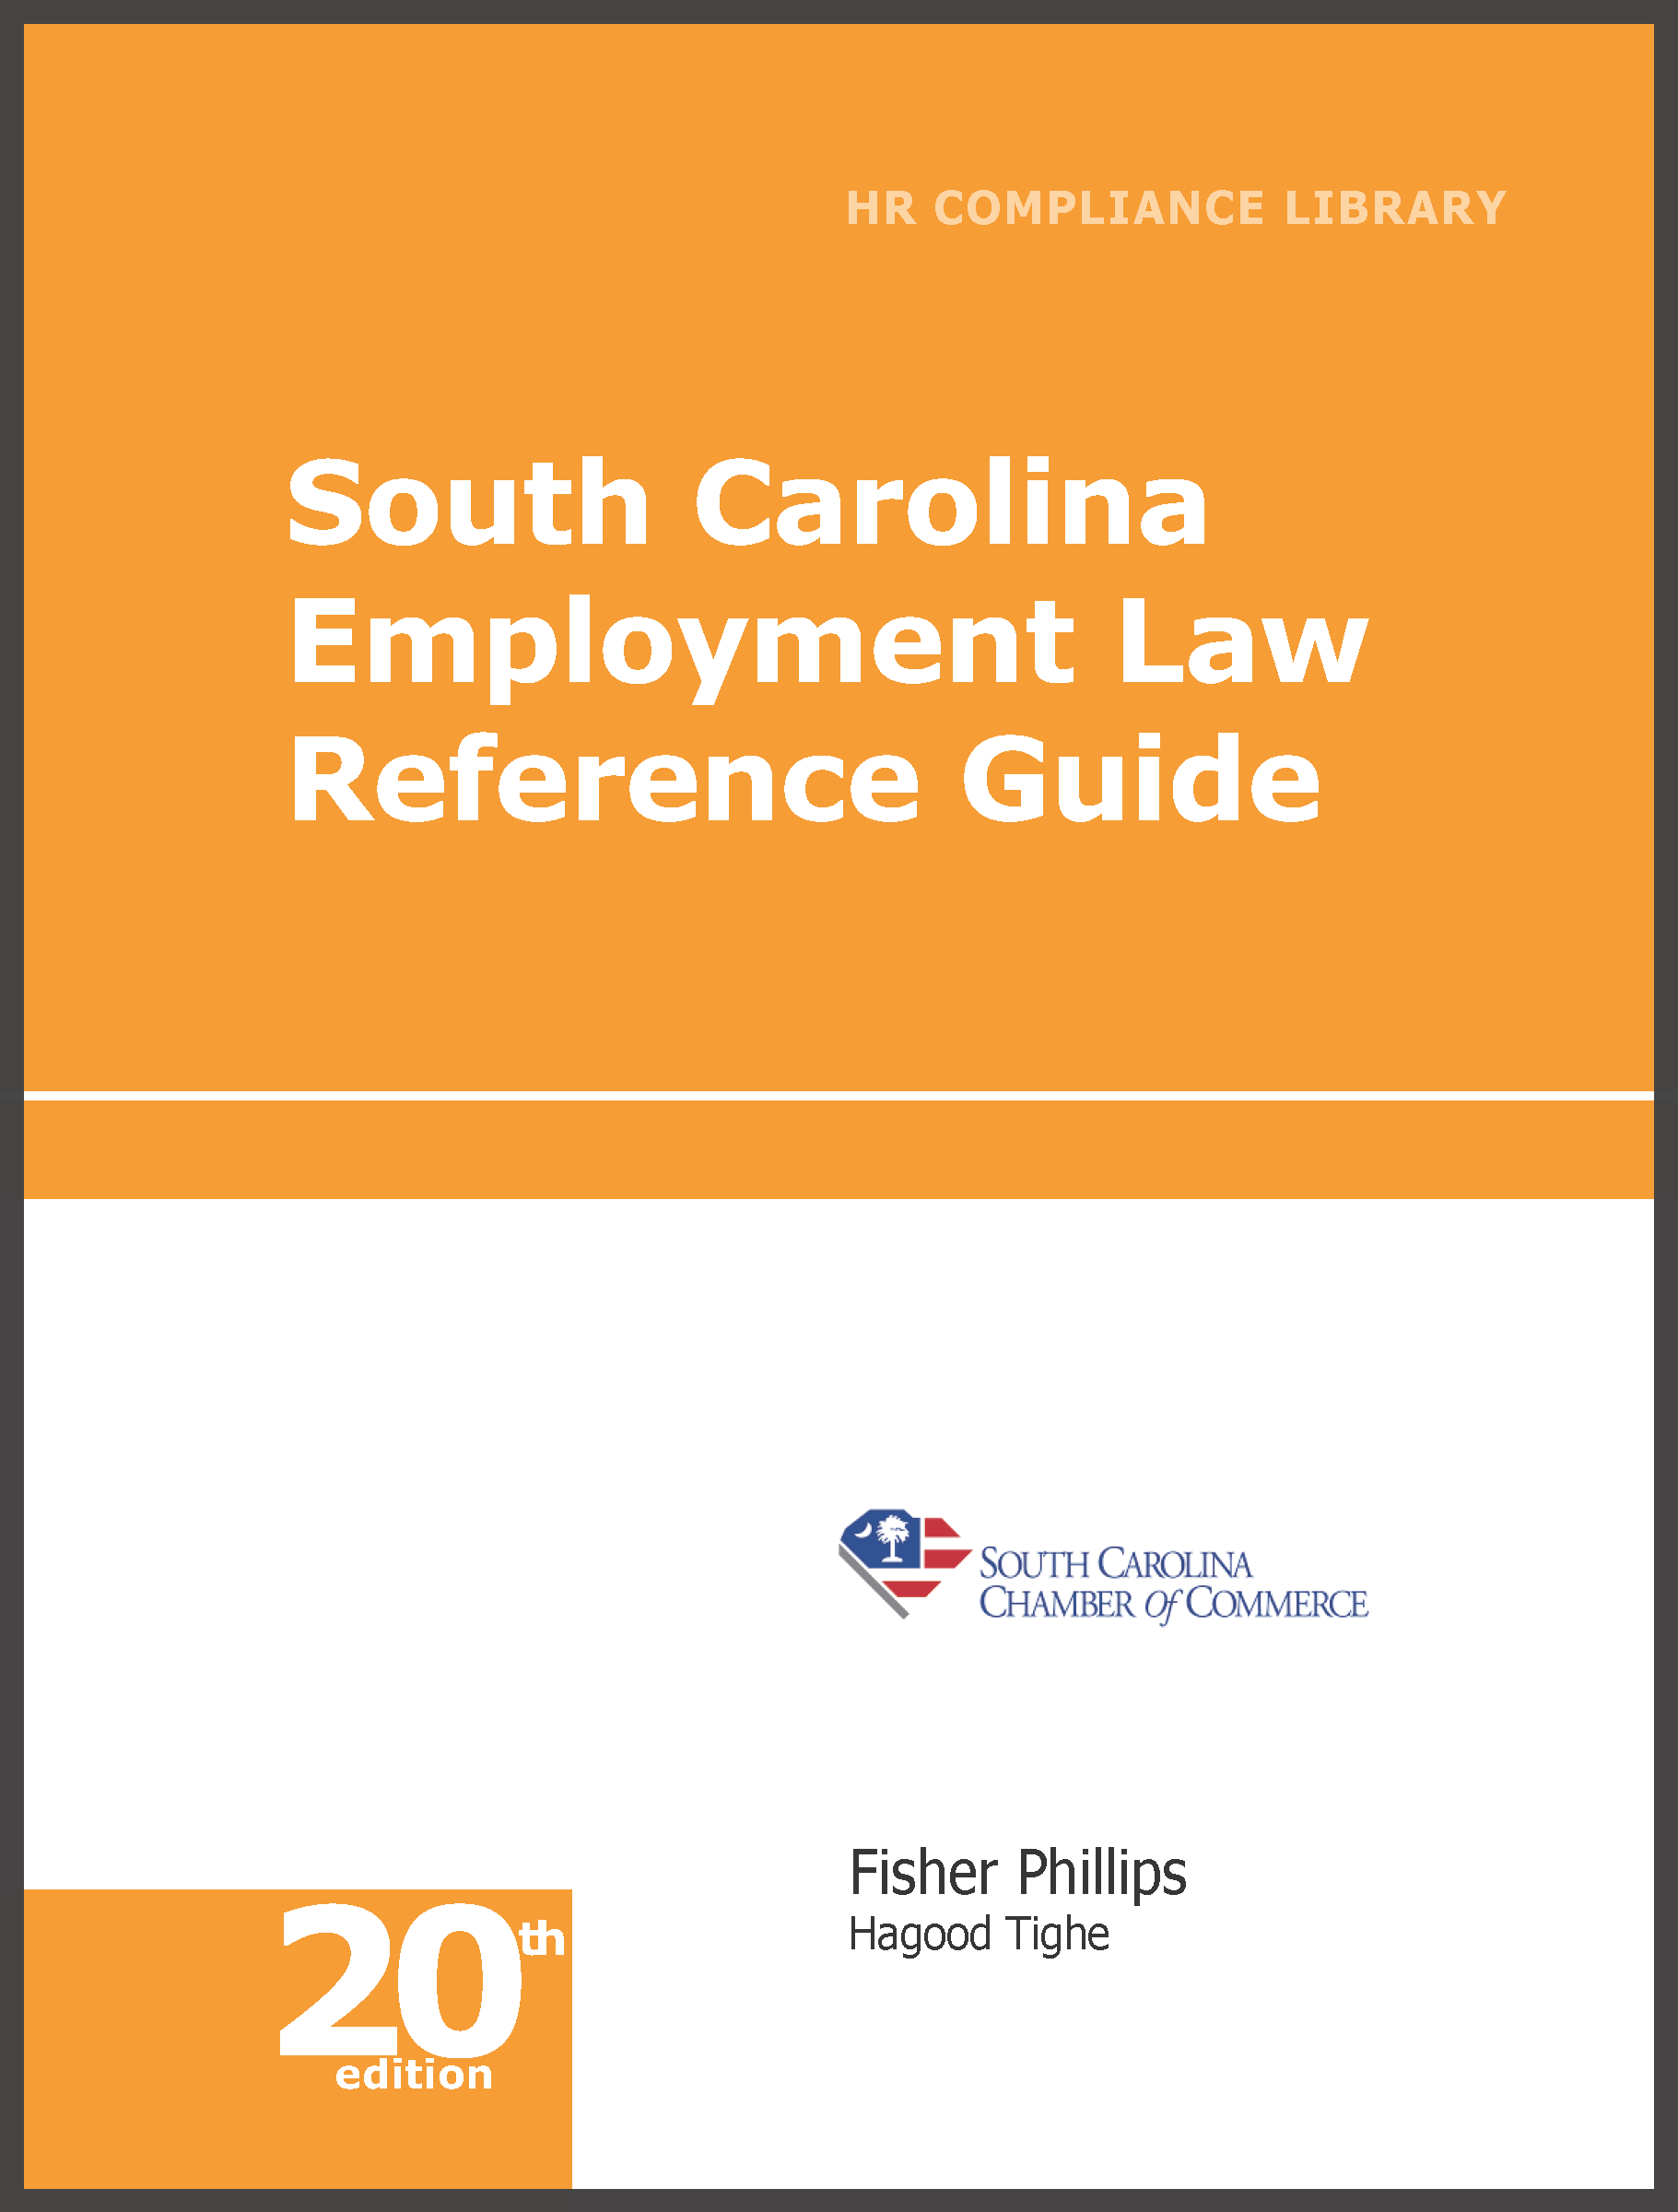 South Carolina Human Resources Library—Online Only employment law image, remote work, labor laws, employment laws, right to work, order of protection, minimum wage